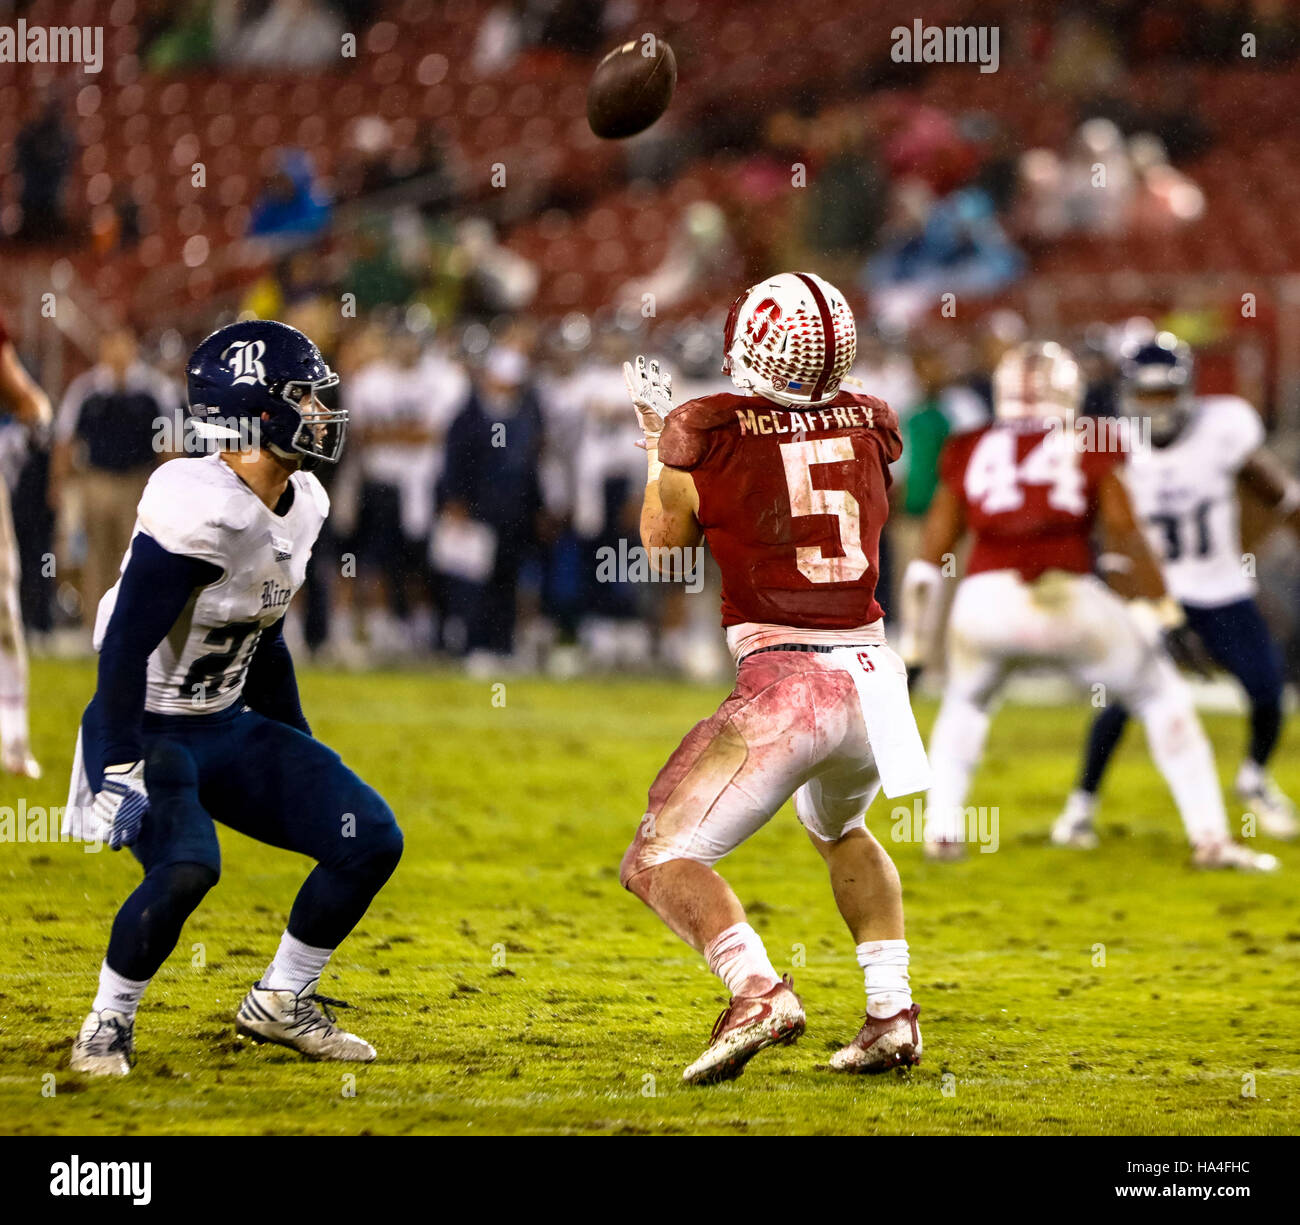 Palo Alto, California, USA. 26th Nov, 2016. Stanford Running Back Christian McCaffrey (5) catching a punt in NCAA football action at Stanford University, featuring the Rice Owls visiting the Stanford Cardinal. Stanford won the game 41-17. © Seth Riskin/ZUMA Wire/Alamy Live News Stock Photo